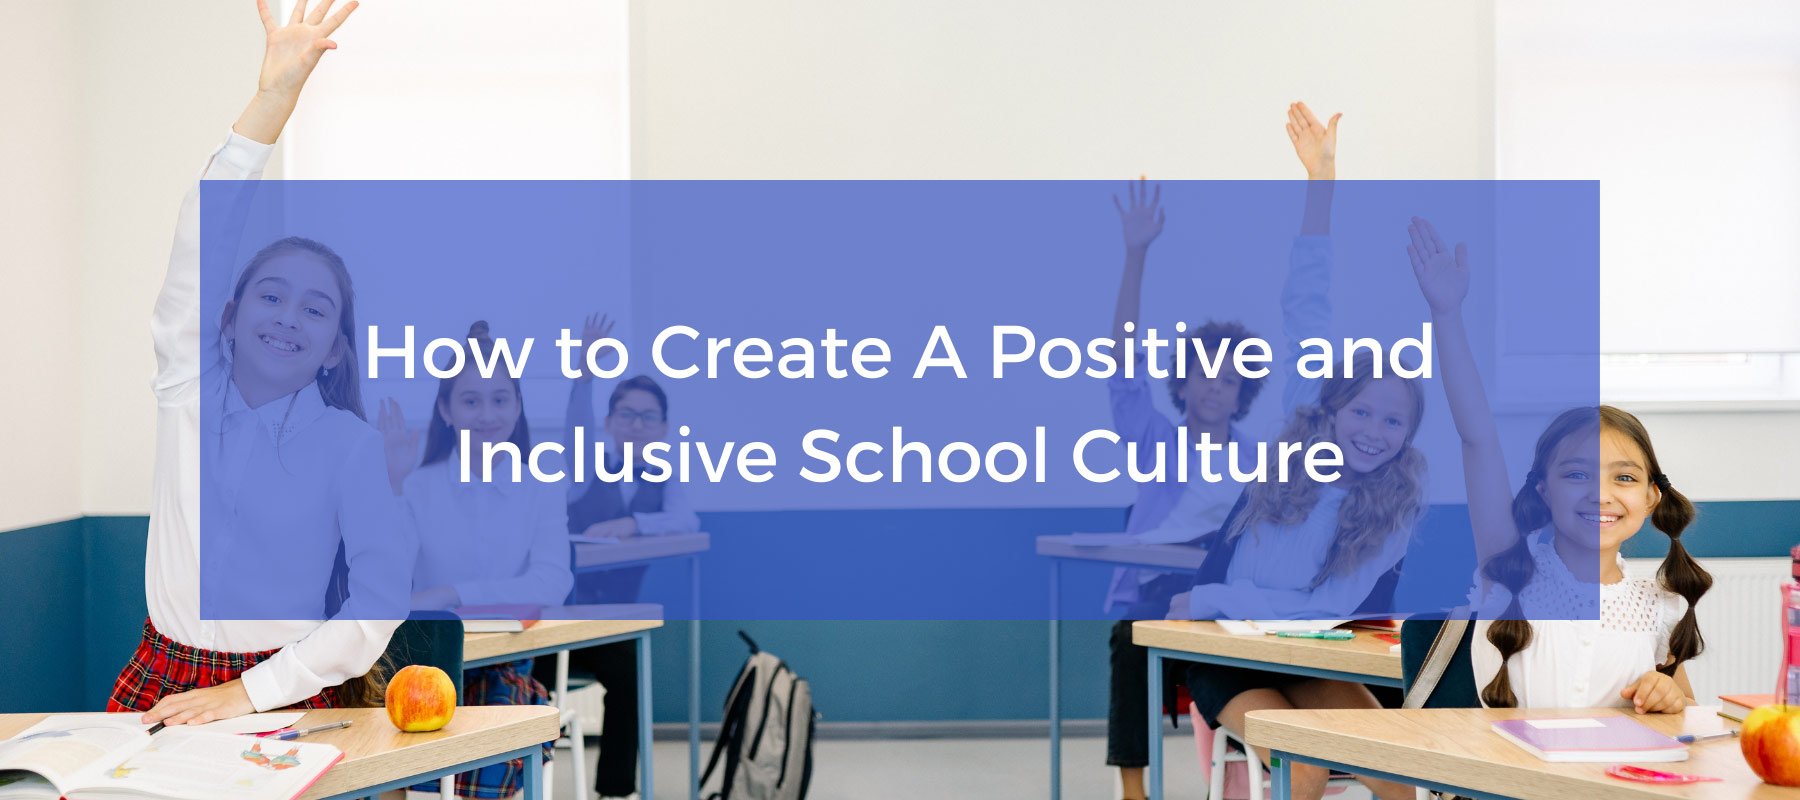 How to Create A Positive and Inclusive School Culture